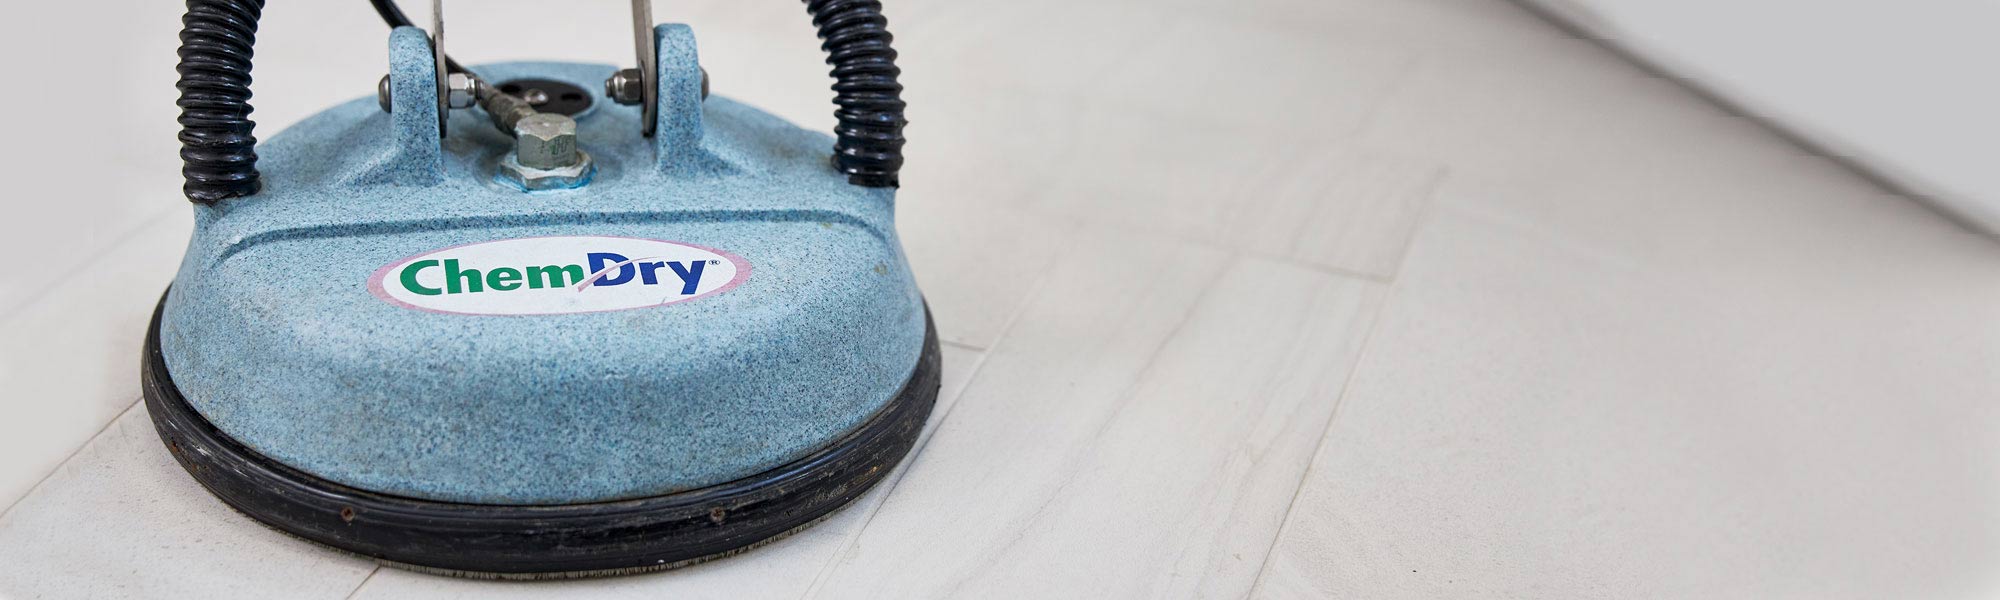 Chem-Dry Carpet Cleaning by Warren's Professional Tile, Grout and Stone Cleaning Services